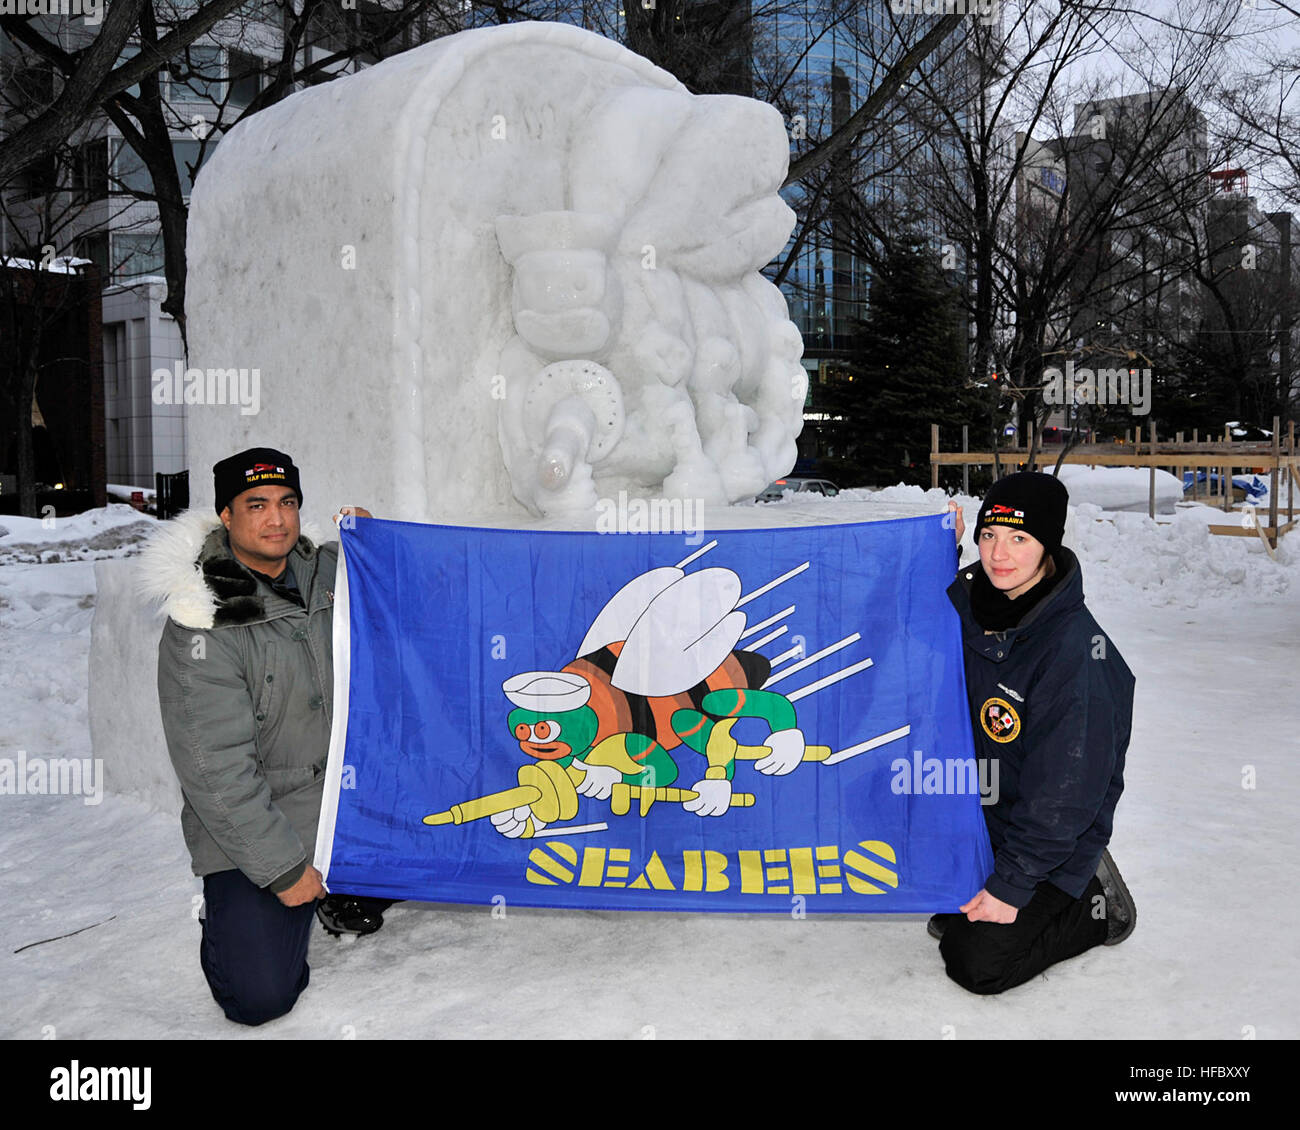 Chief Builder Billy Harger, left, originally from Pearl City, Hawaii, and Utilitiesman Constructionman Ariel Hogue, a native of Pensacola, Fla., display a flag emblazoned with the U.S. Navy Seabee's 'Fighting Bee' design, Feb. 3, 3014.  Both sailors are attached to Naval Facilities Engineering Command Far East Detachment Misawa, and are also members of the 2014 Navy Misawa Snow Team, which is in Hokkaido, Japan, taking part in the 65th Annual Sapporo Snow Festival.  The team sculpted a frosty, 3-D version of the U.S. Navy Seabee's 'Fighting Bee' logo.  This is the 31st year that Naval Air Faci Stock Photo